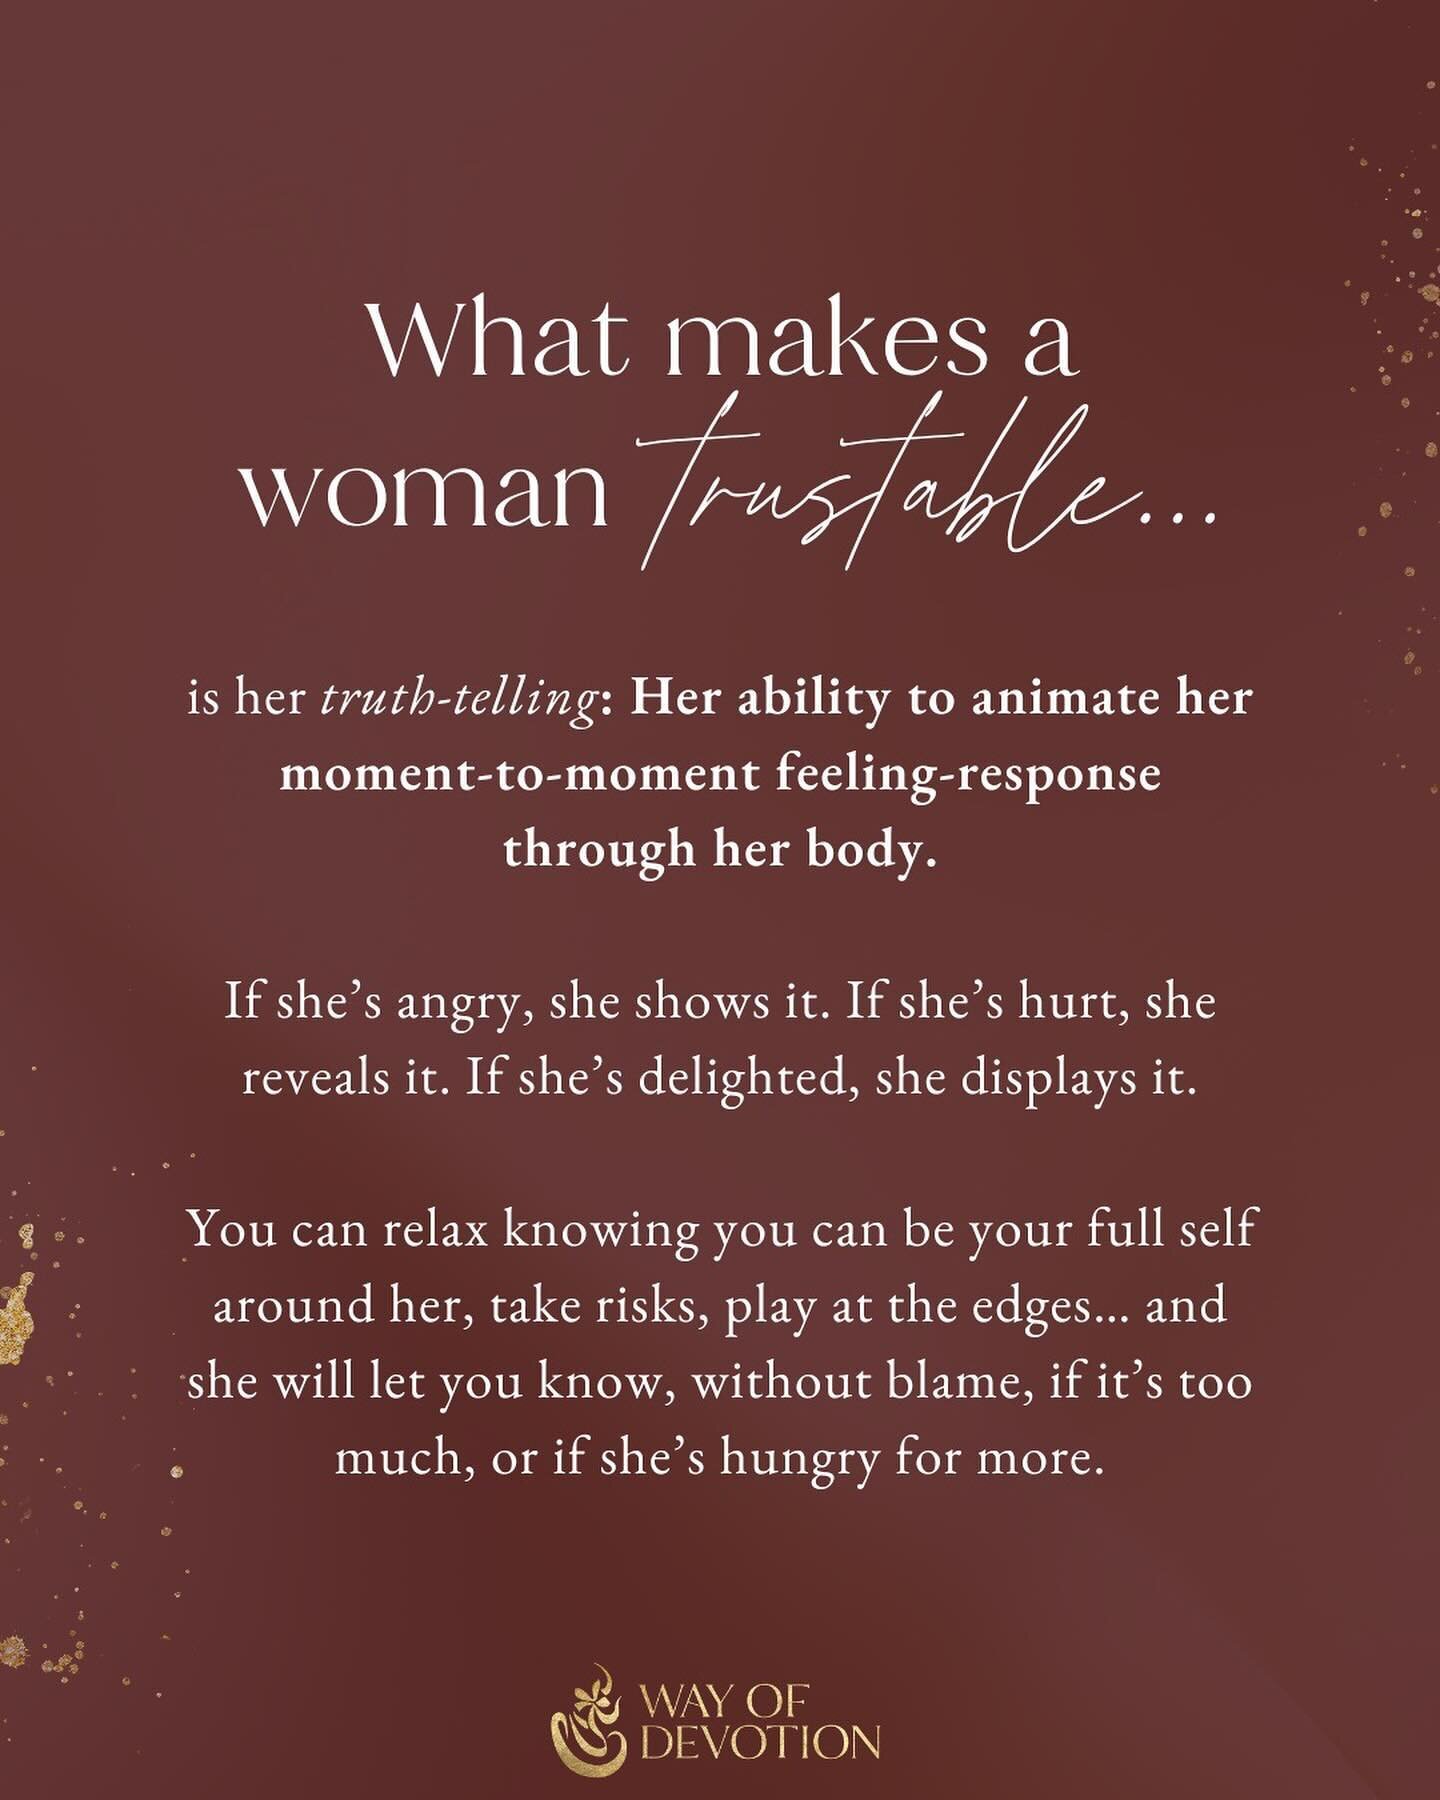 A trustable woman lives in direct relationship with the subtle forces of emotion, feeling, &amp; intuition that reside within her, &amp; she&rsquo;s not afraid to incarnate these forces through her bodily expression.⁣
⁣
Well&hellip; maybe she is afra